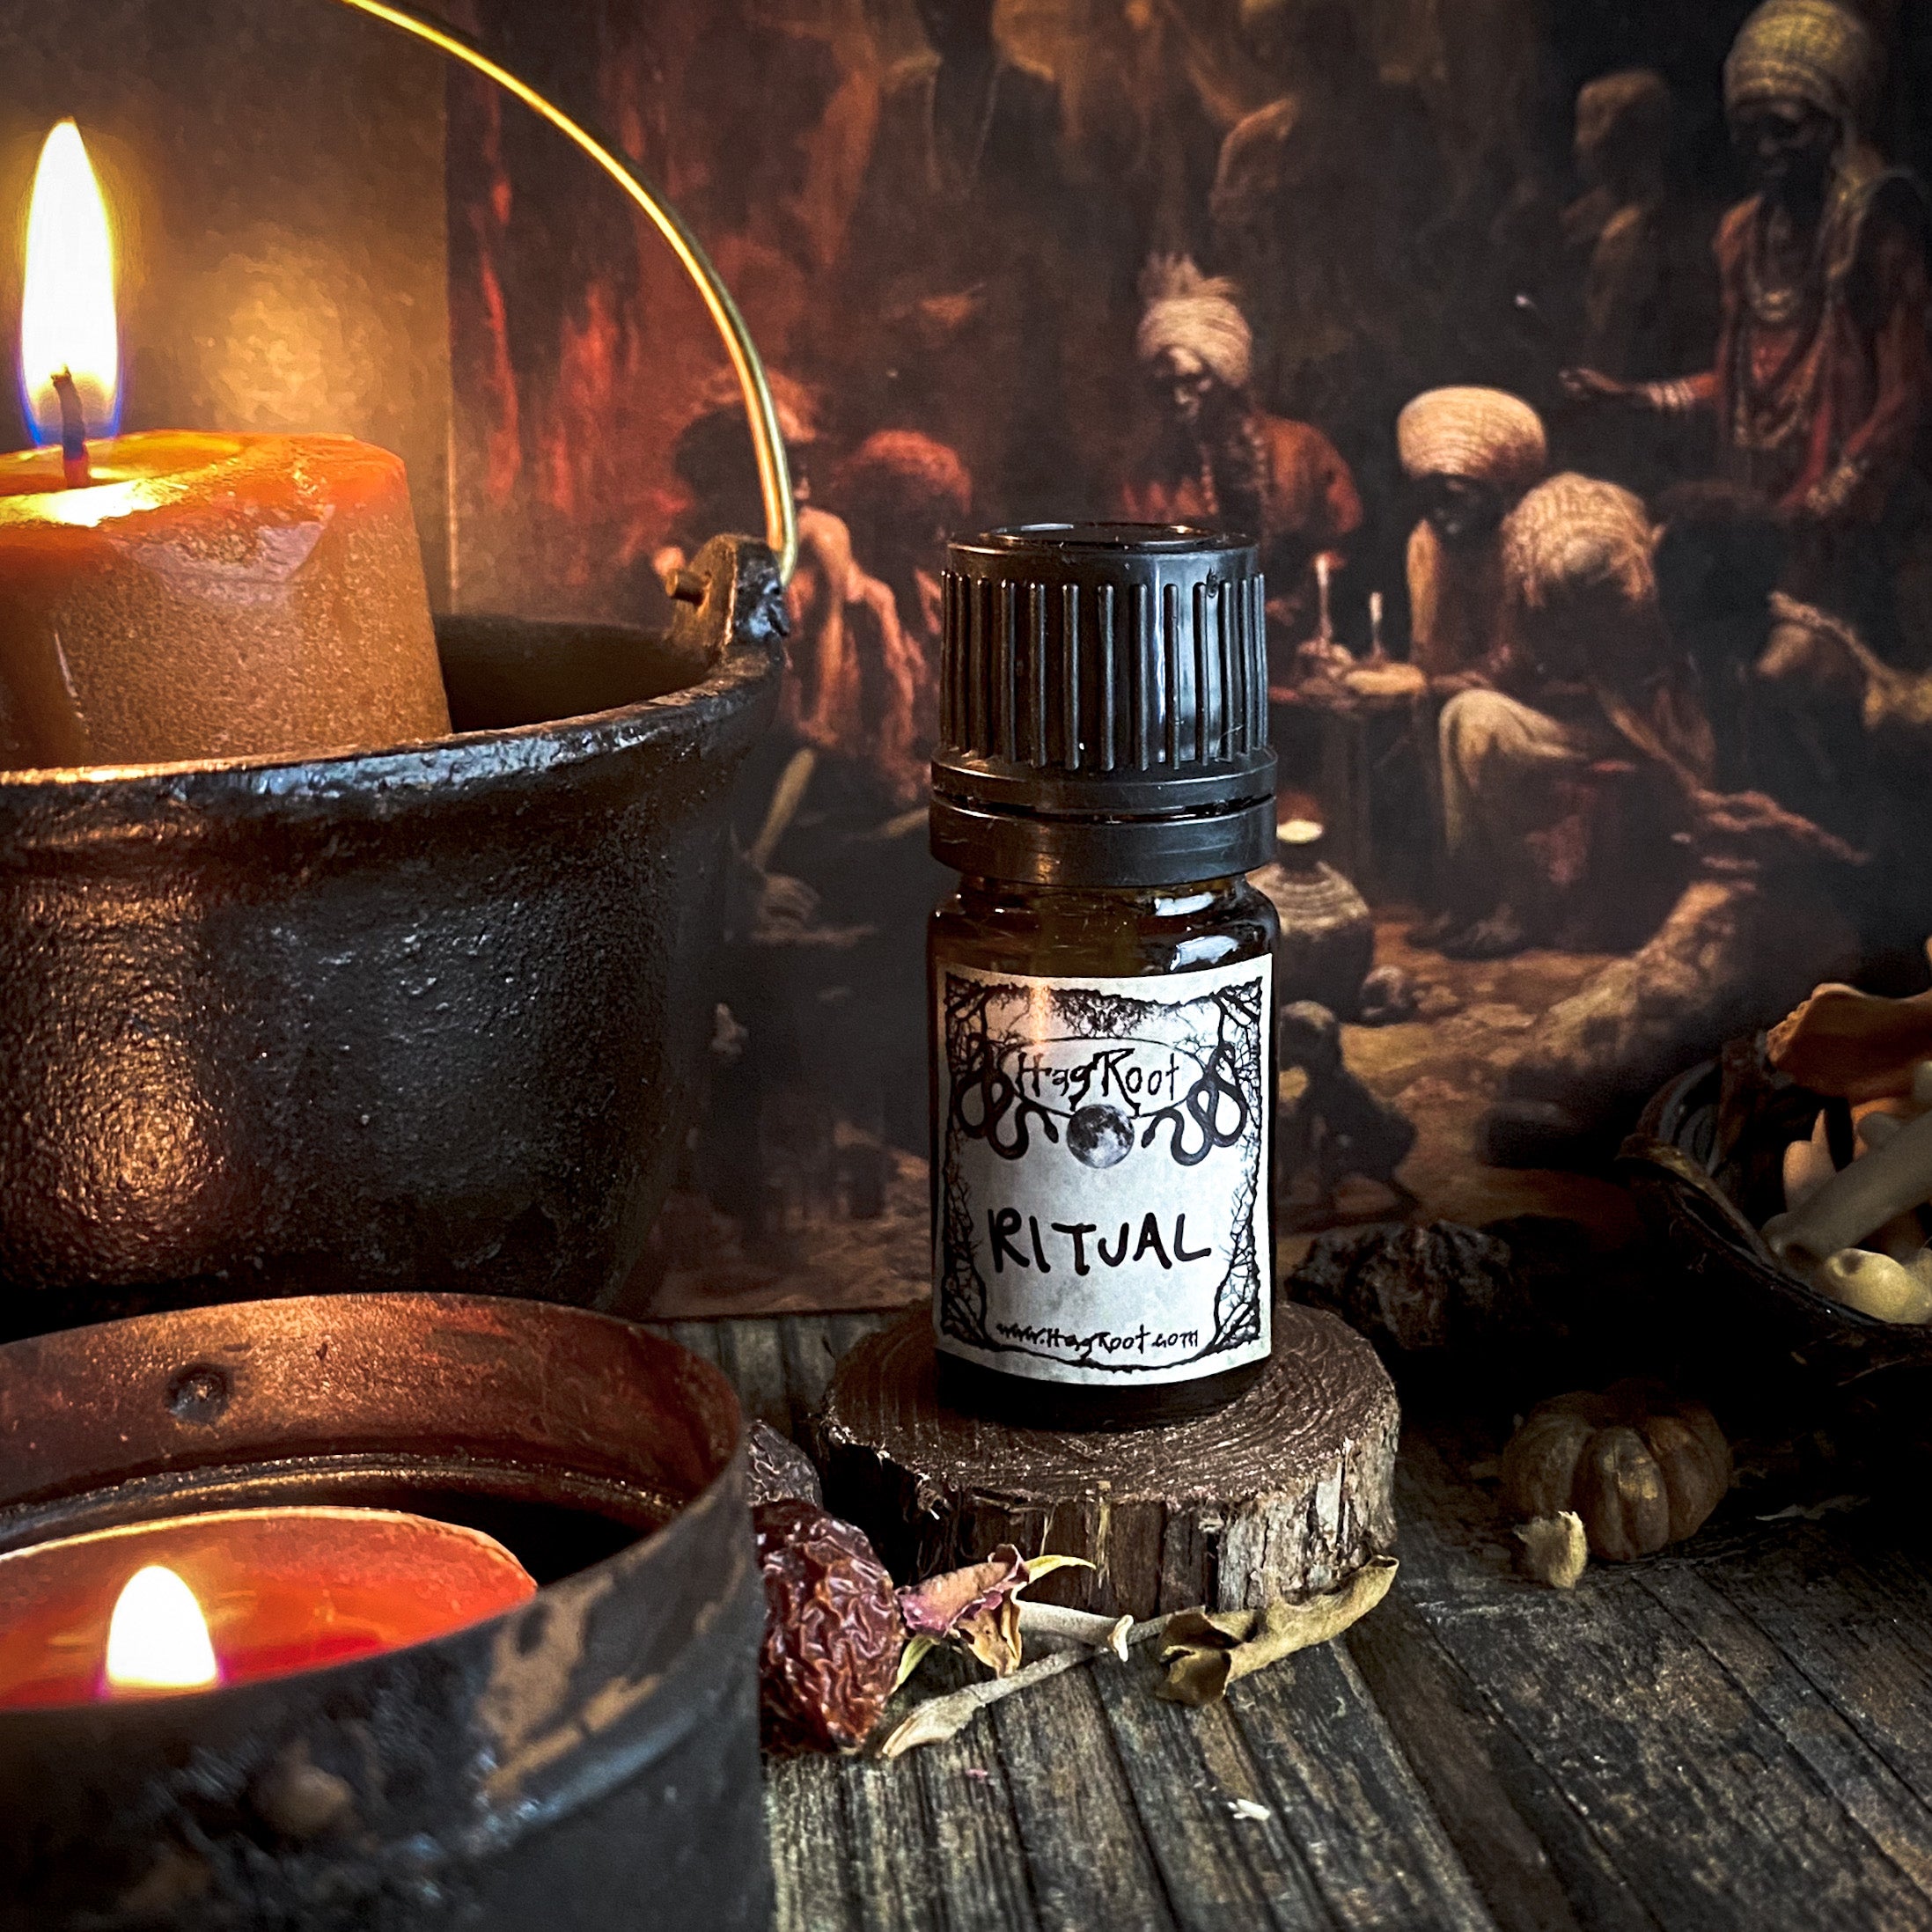 RITUAL-(Birch, Spruce, Frankincense, Hawthorn Berry, Moss, Pinion Wood, Narcissus, Leather)-Perfume, Cologne, Anointing, Ritual Oil